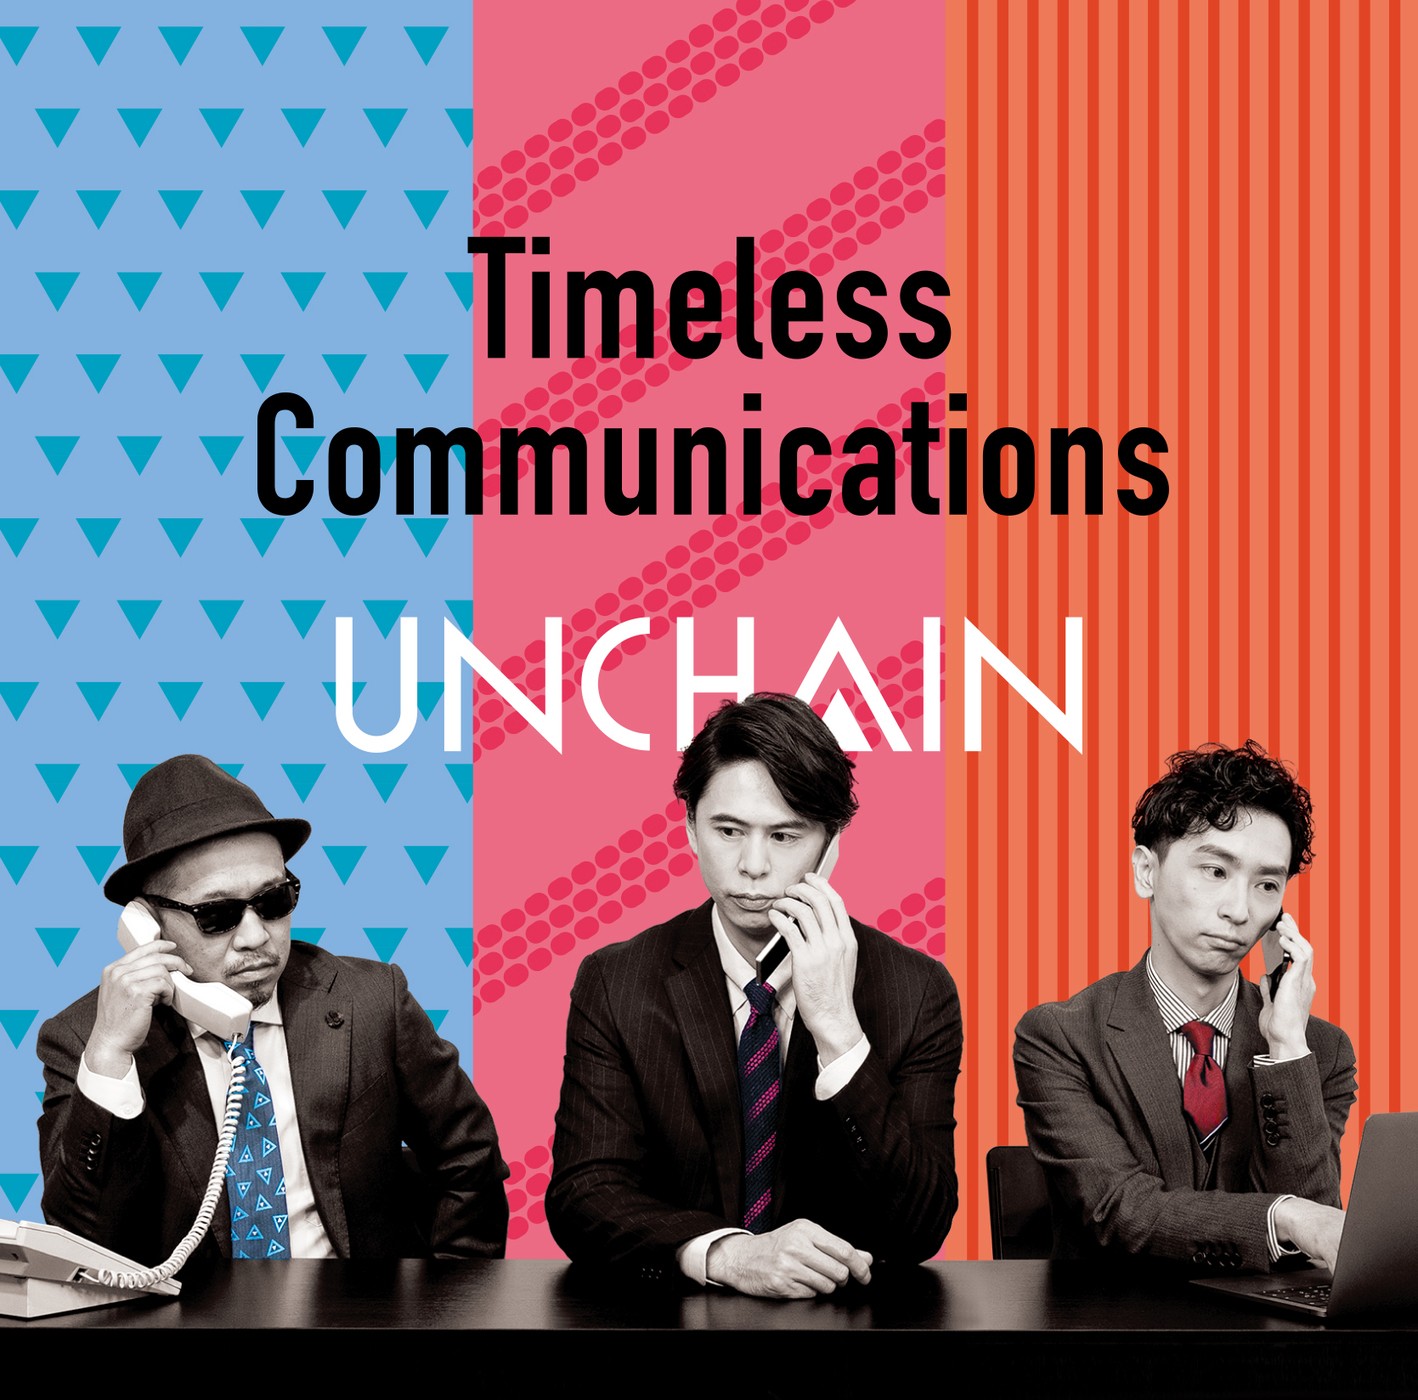 UNCHAIN – Timeless Communications [FLAC / WEB] [2022.01.19]